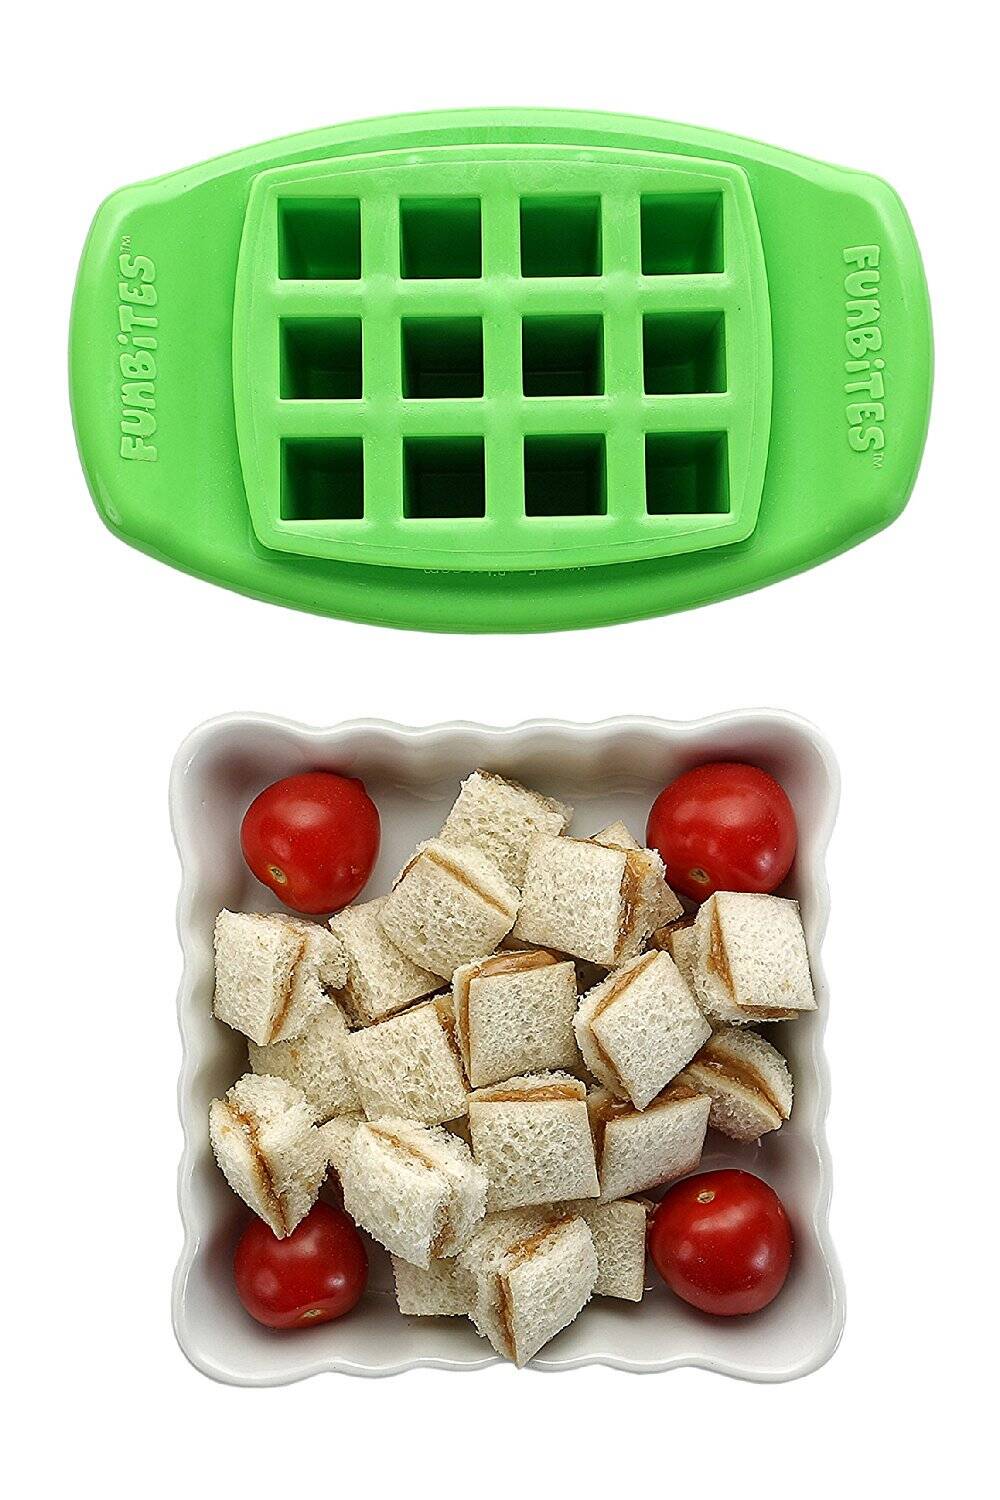 FunBites Food Cutter - //coolthings.us